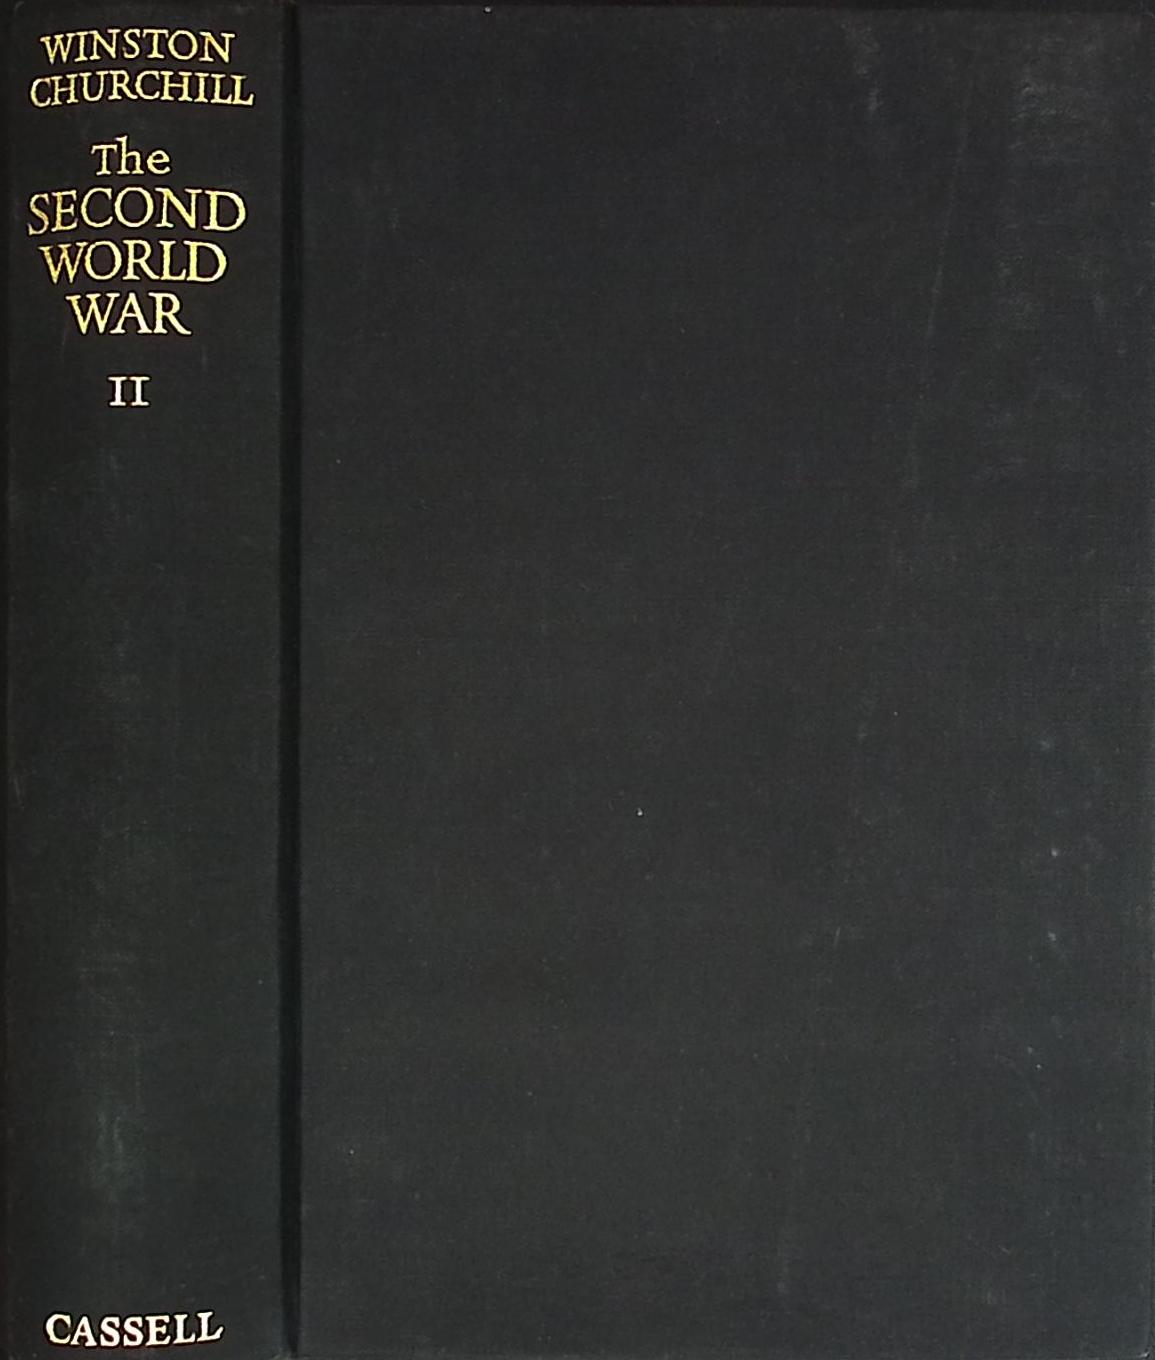 The Second World War. Volume 4, The Hinge of Fate. Cassell edition.